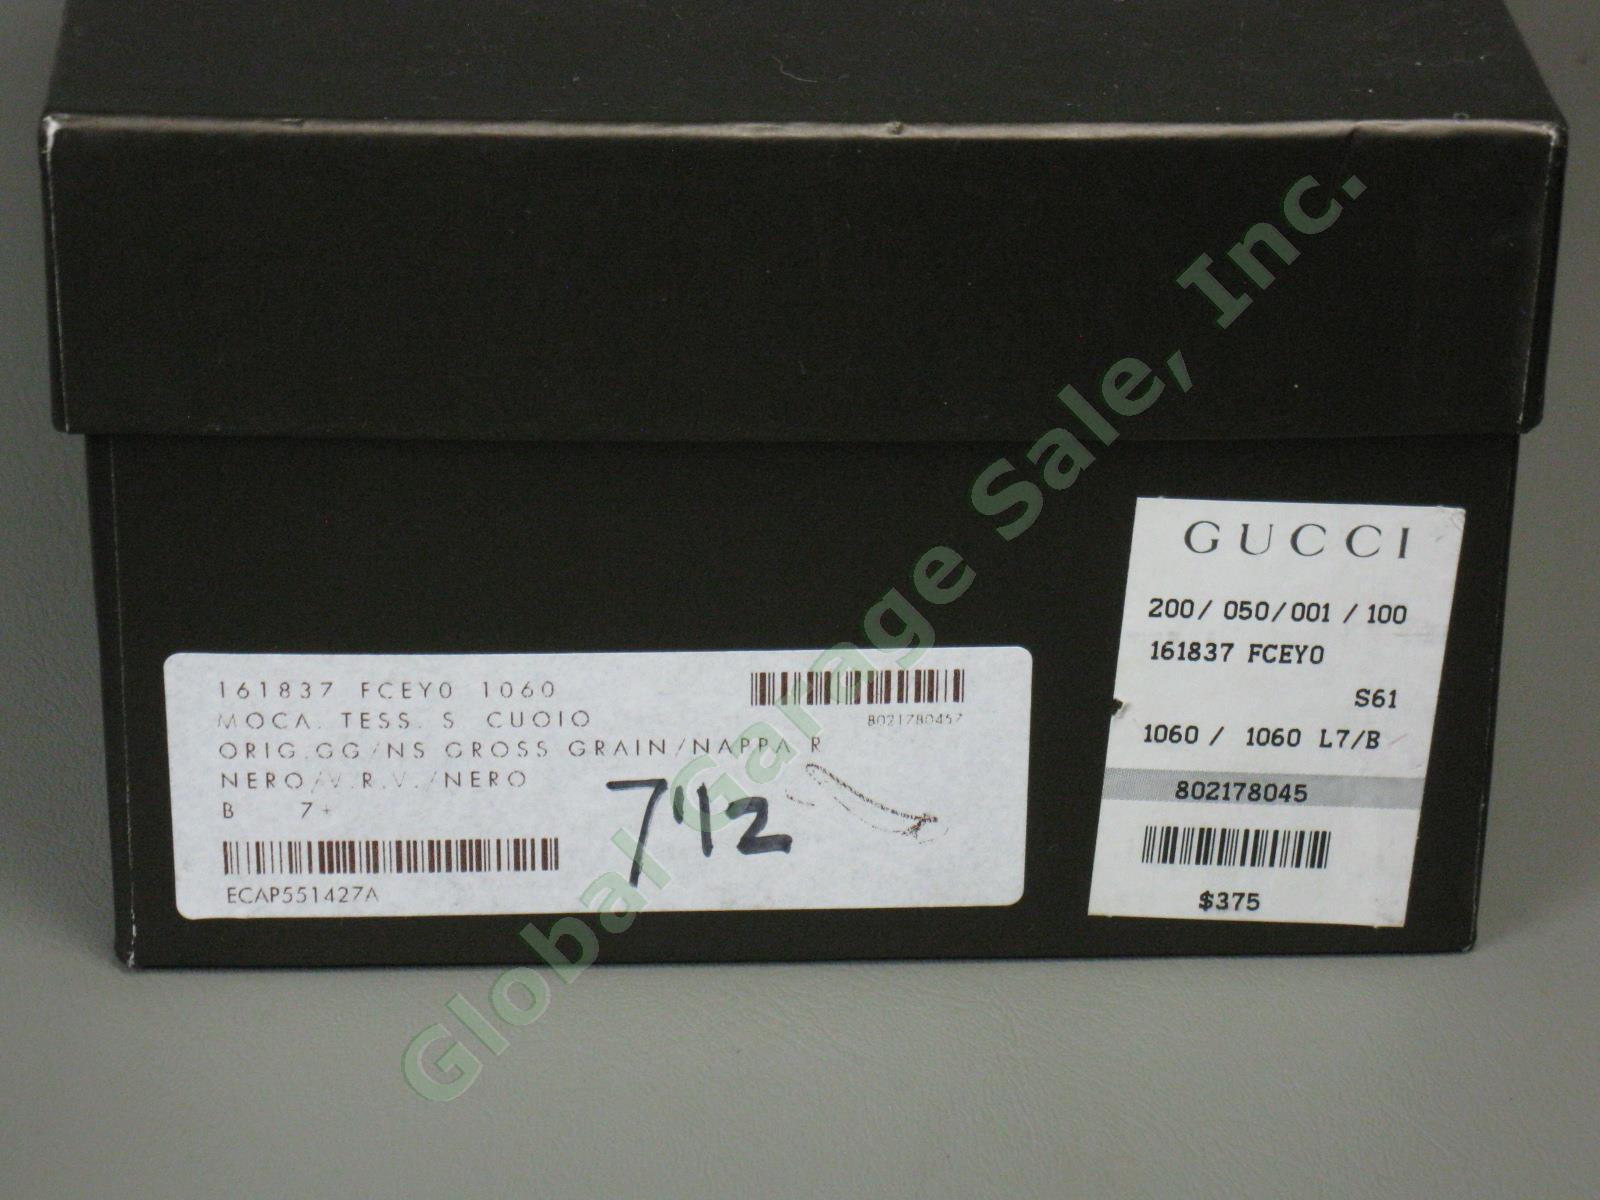 Womens Gucci Moca Tess S Cuoio Flats Size 7.5 Black One Owner With Box 161837 NR 10